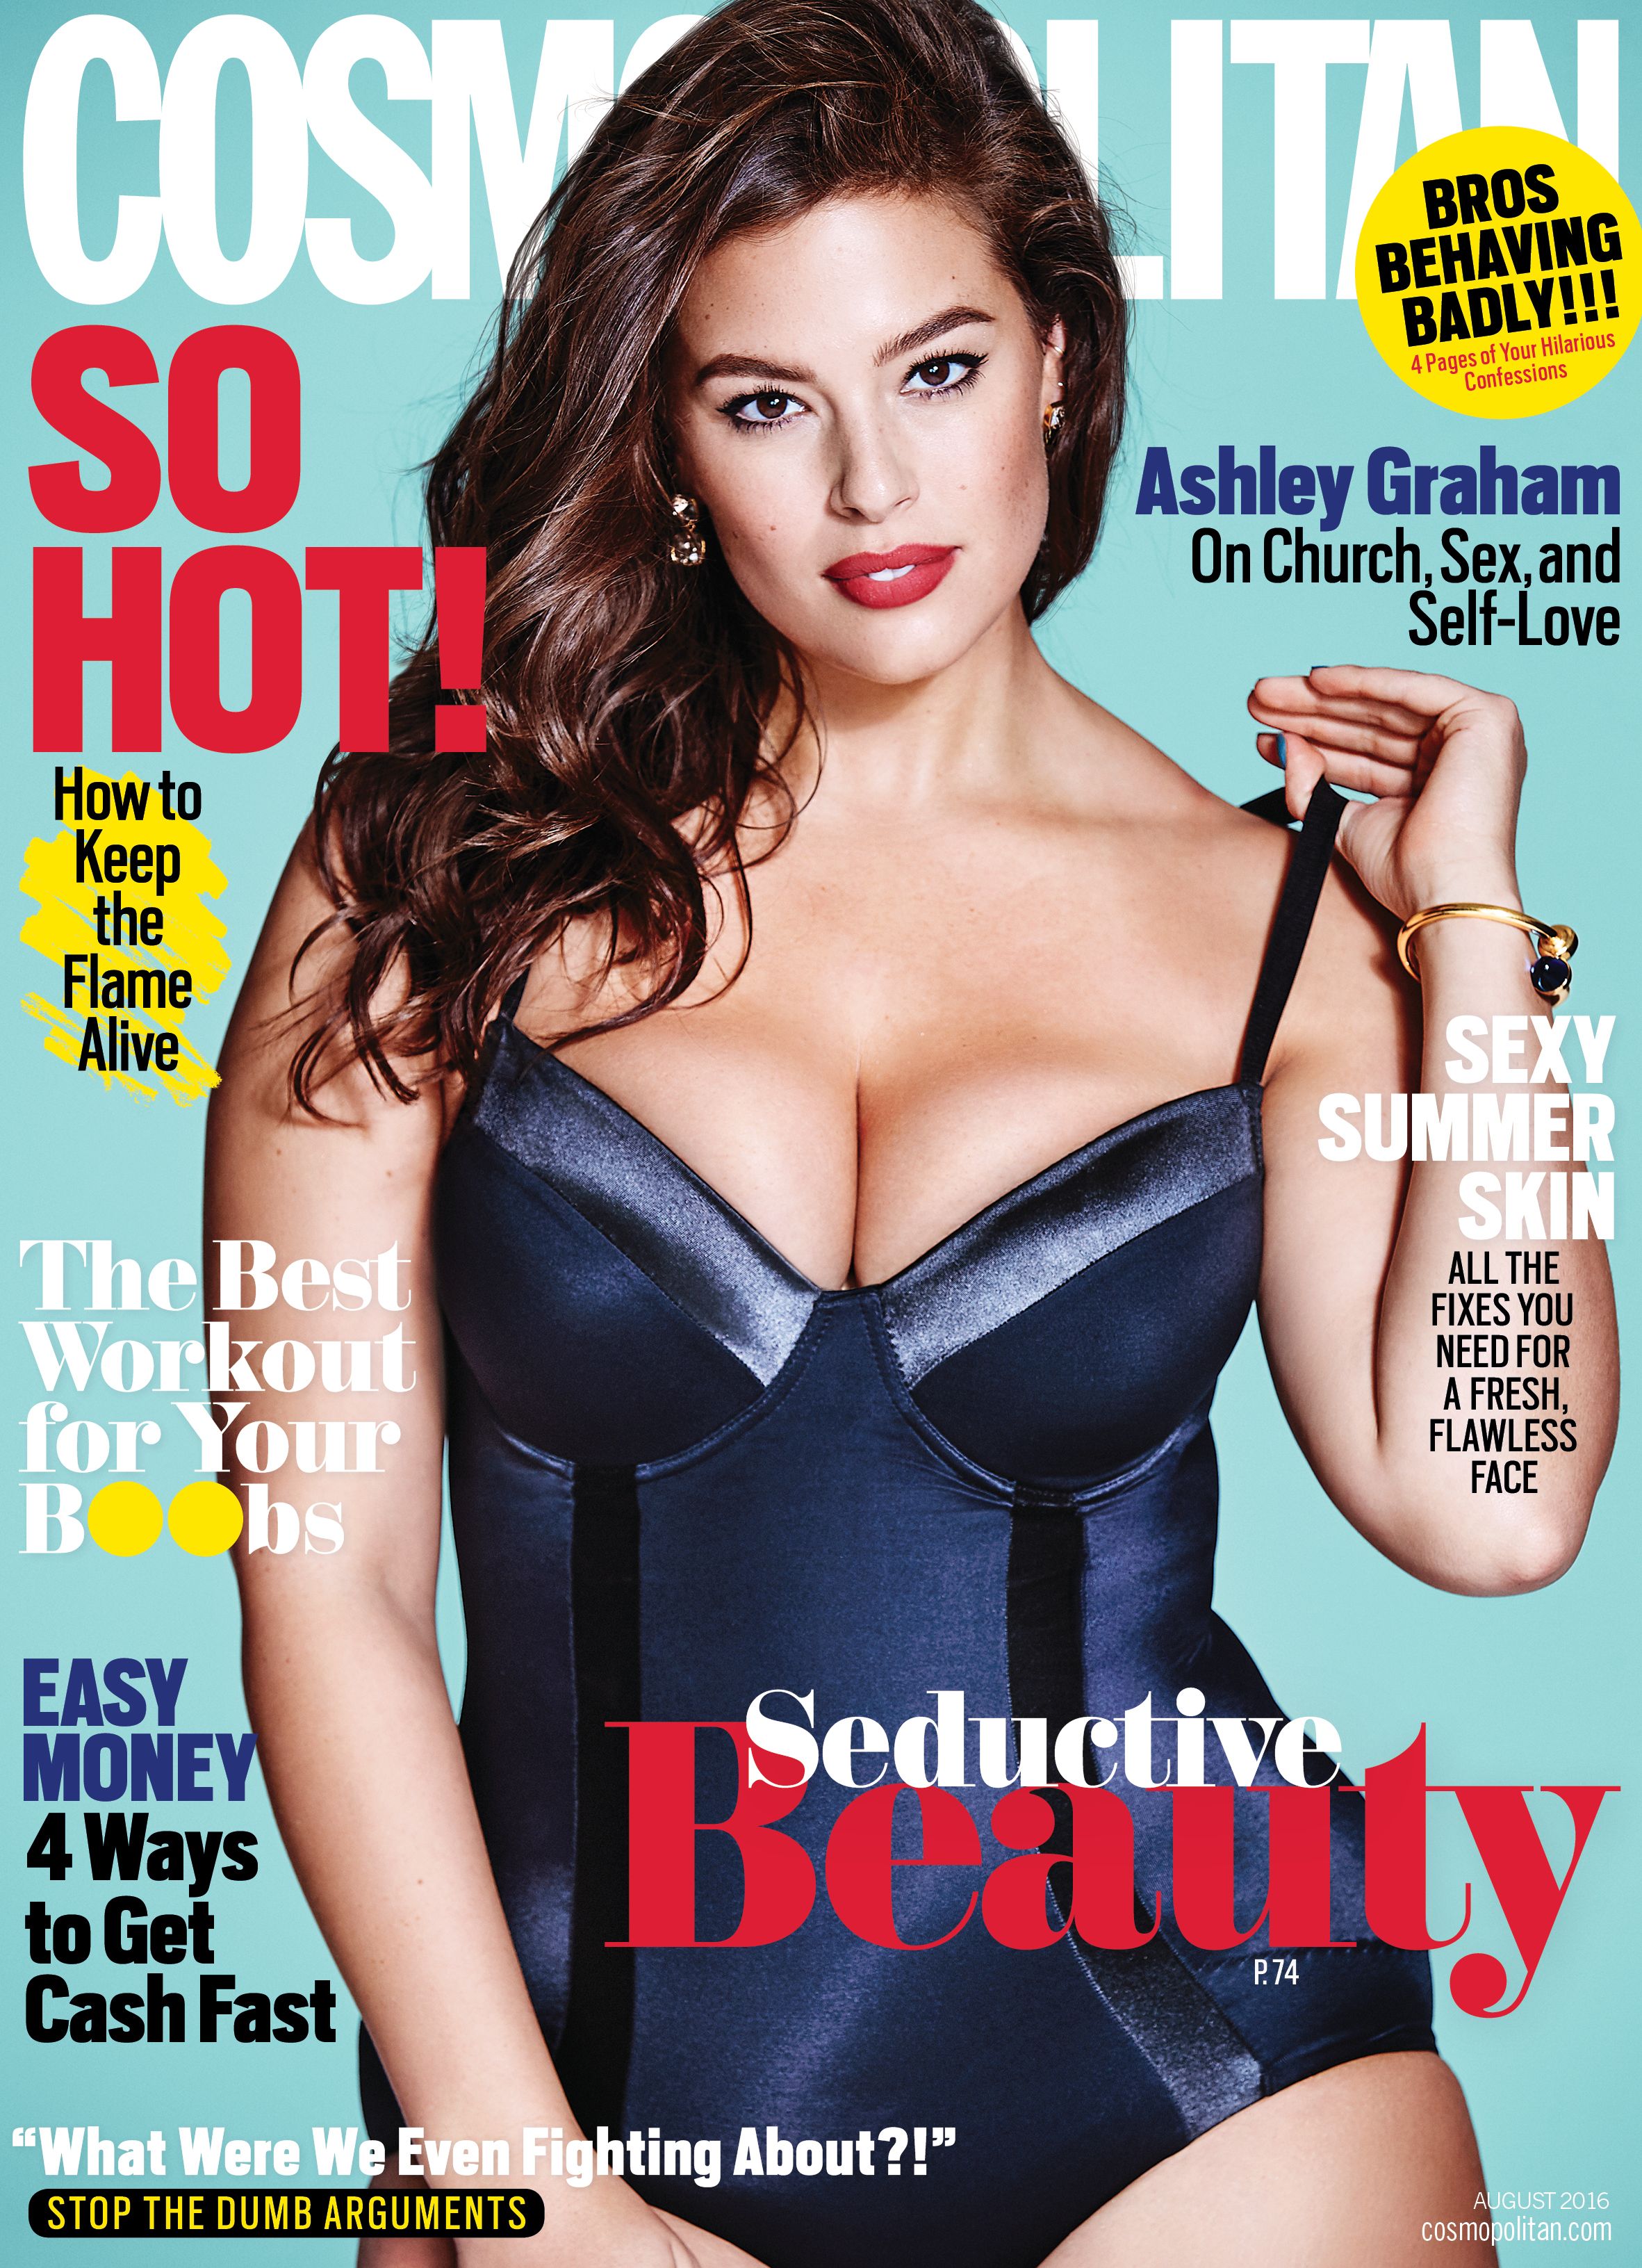 Ashley Graham on August 2016 Cosmopolitan Cover pic